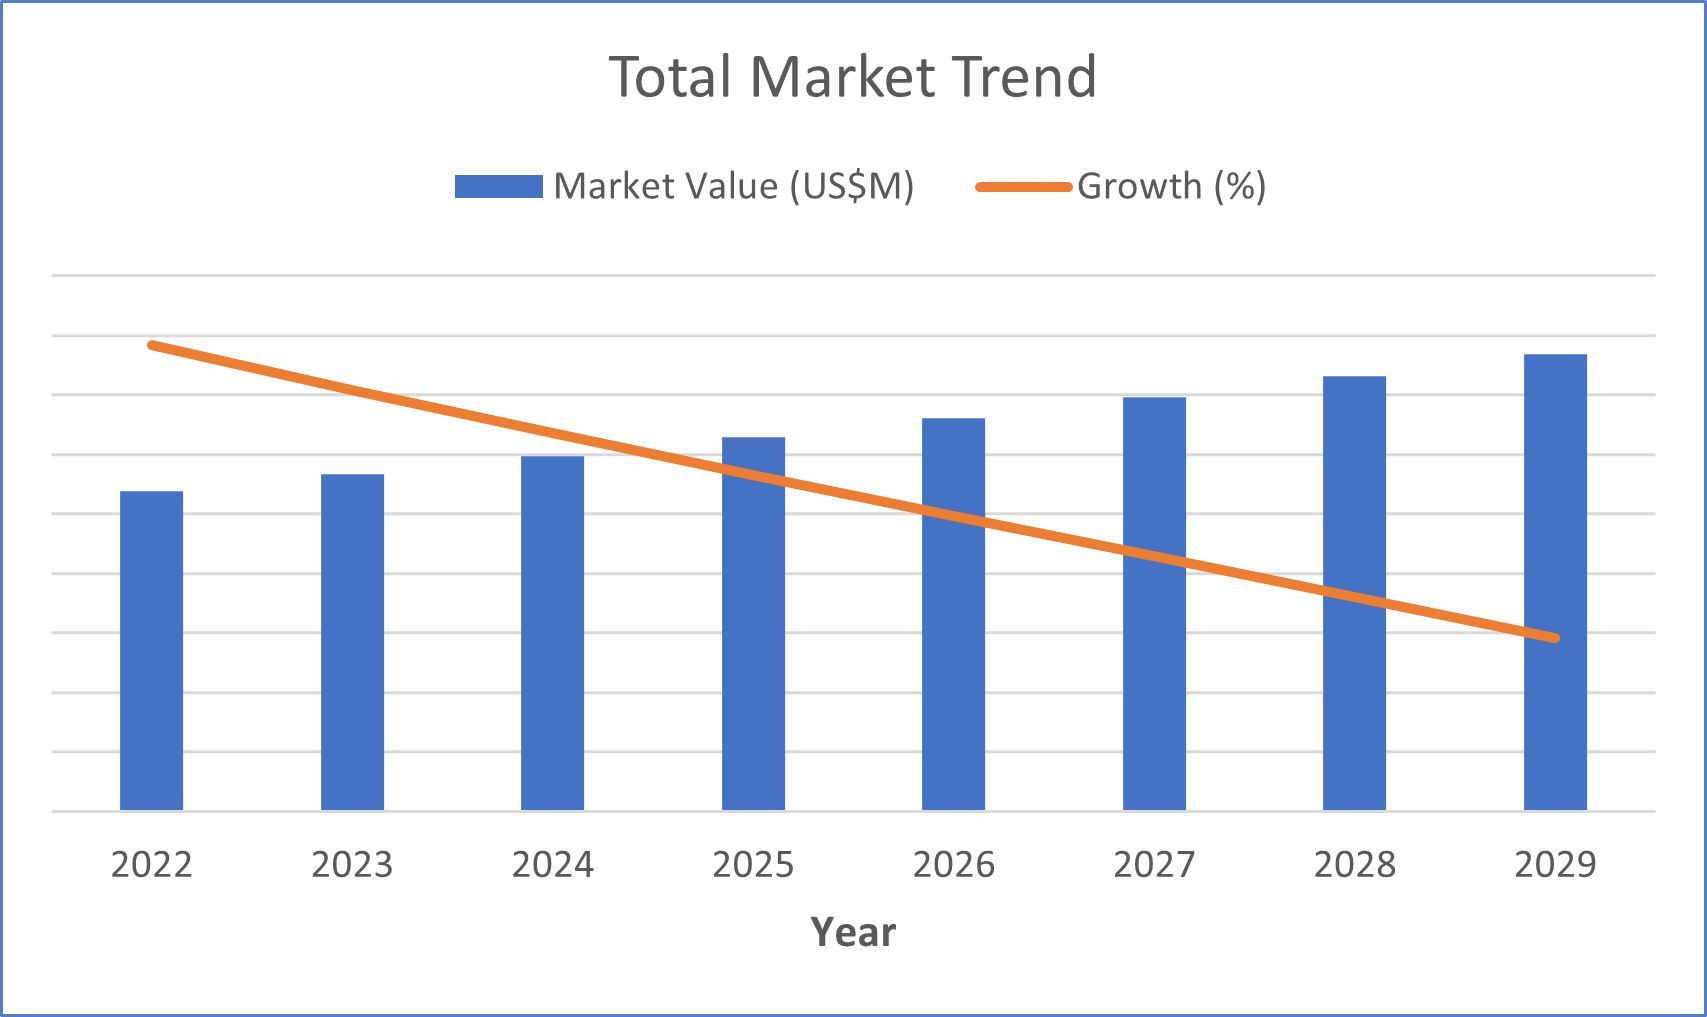 US respiratory devices market growth and value chart